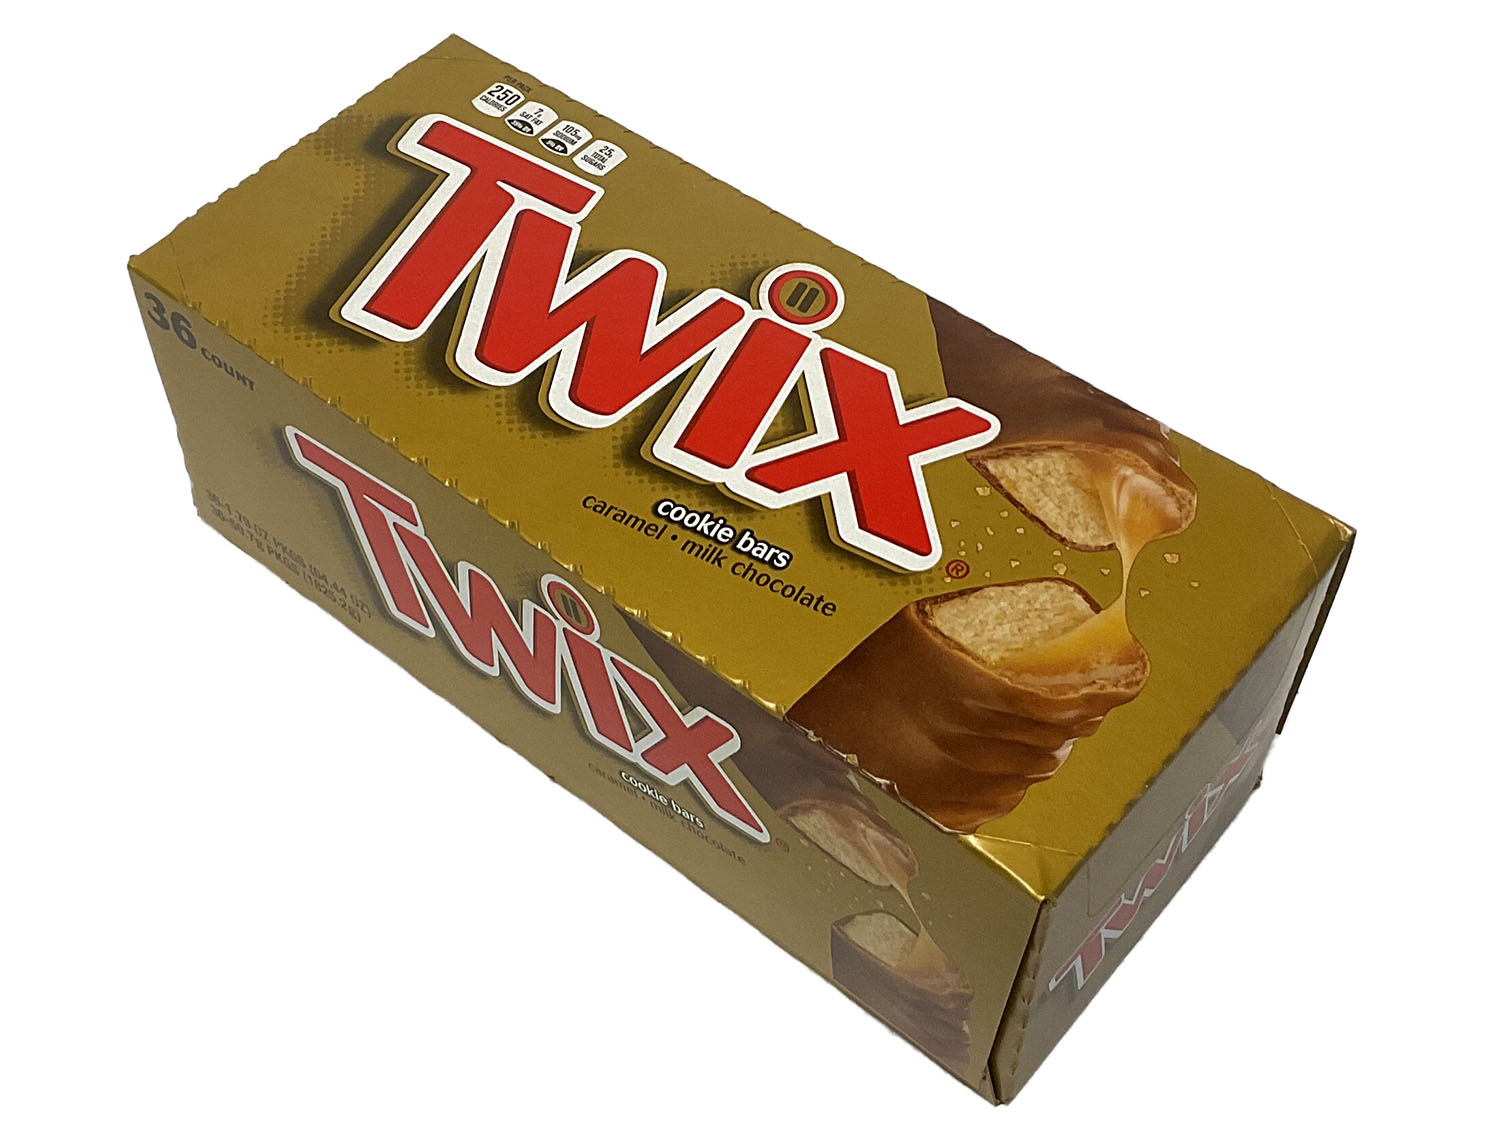 Twix Full Size Caramel Chocolate Cookie Candy Bar 36 Count (Pack of 1)